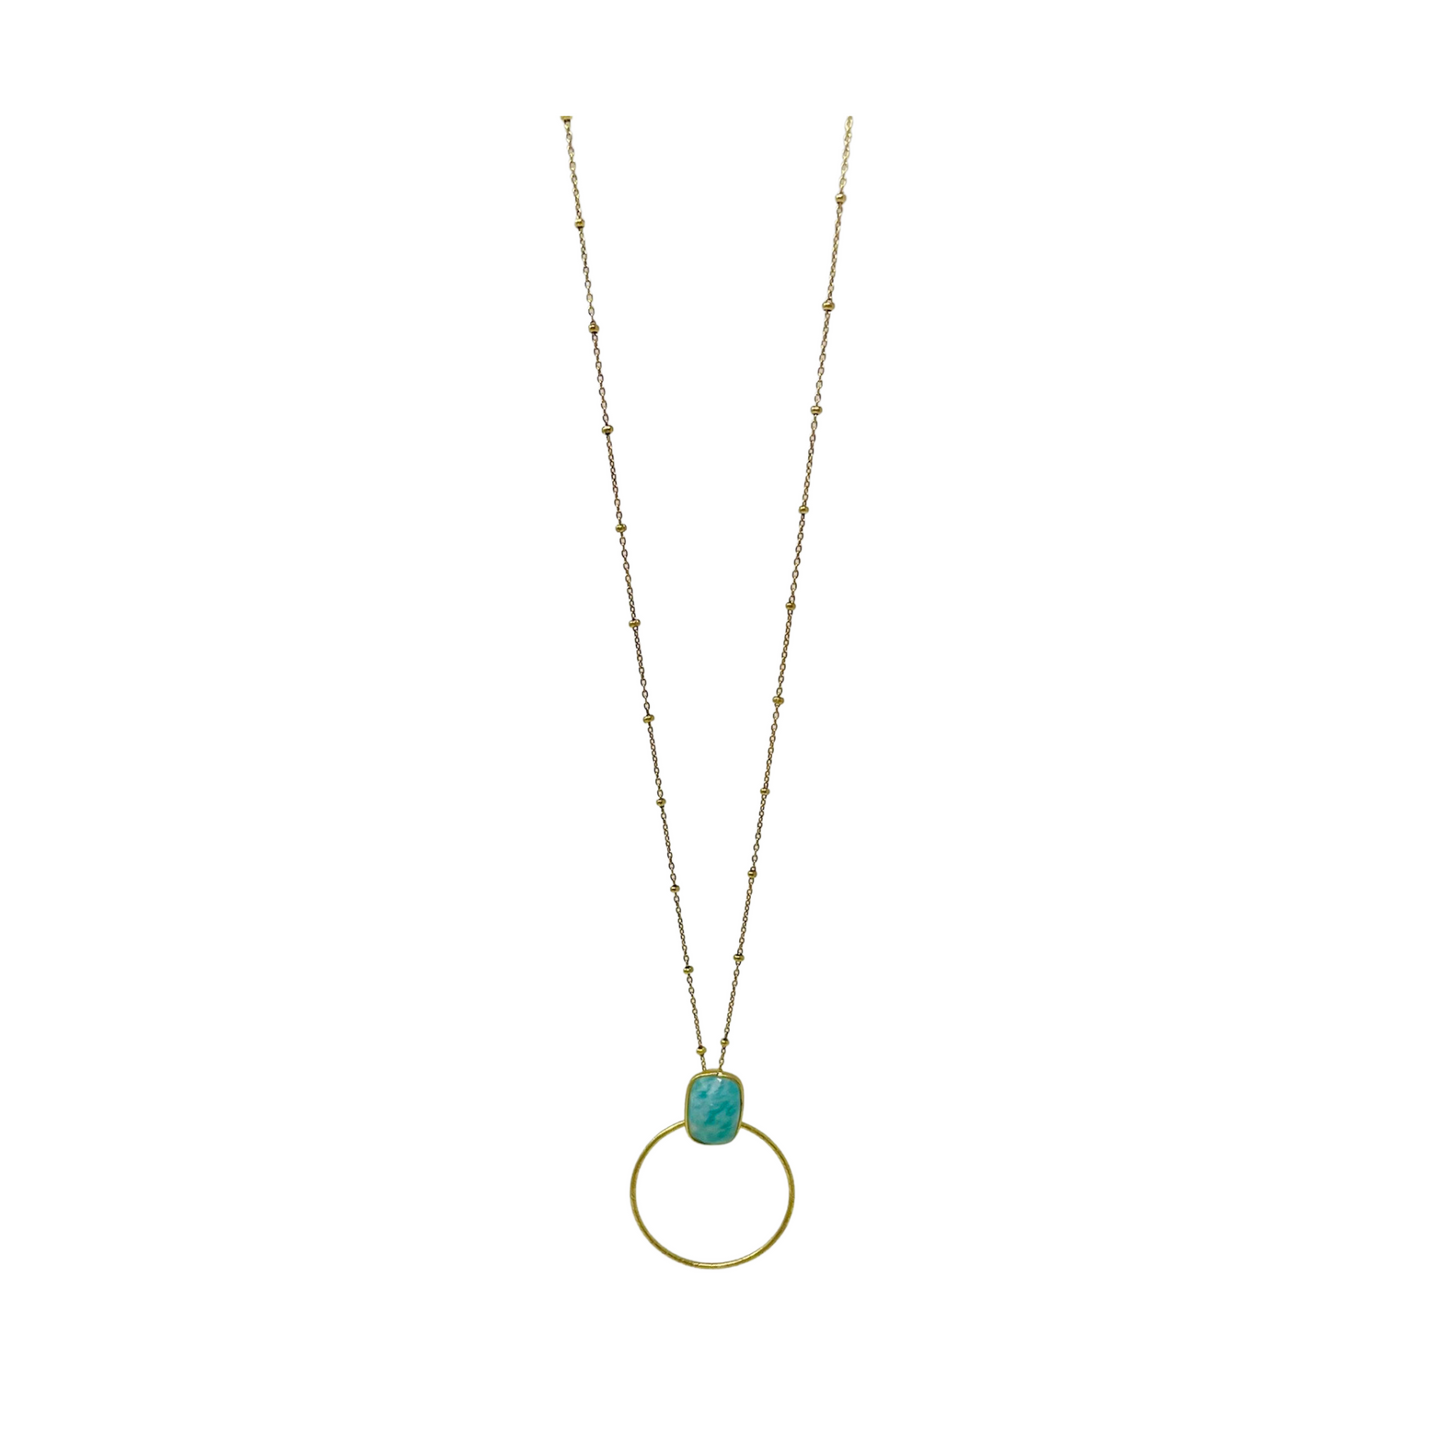 Gold Circle Necklace with Aqua Stone